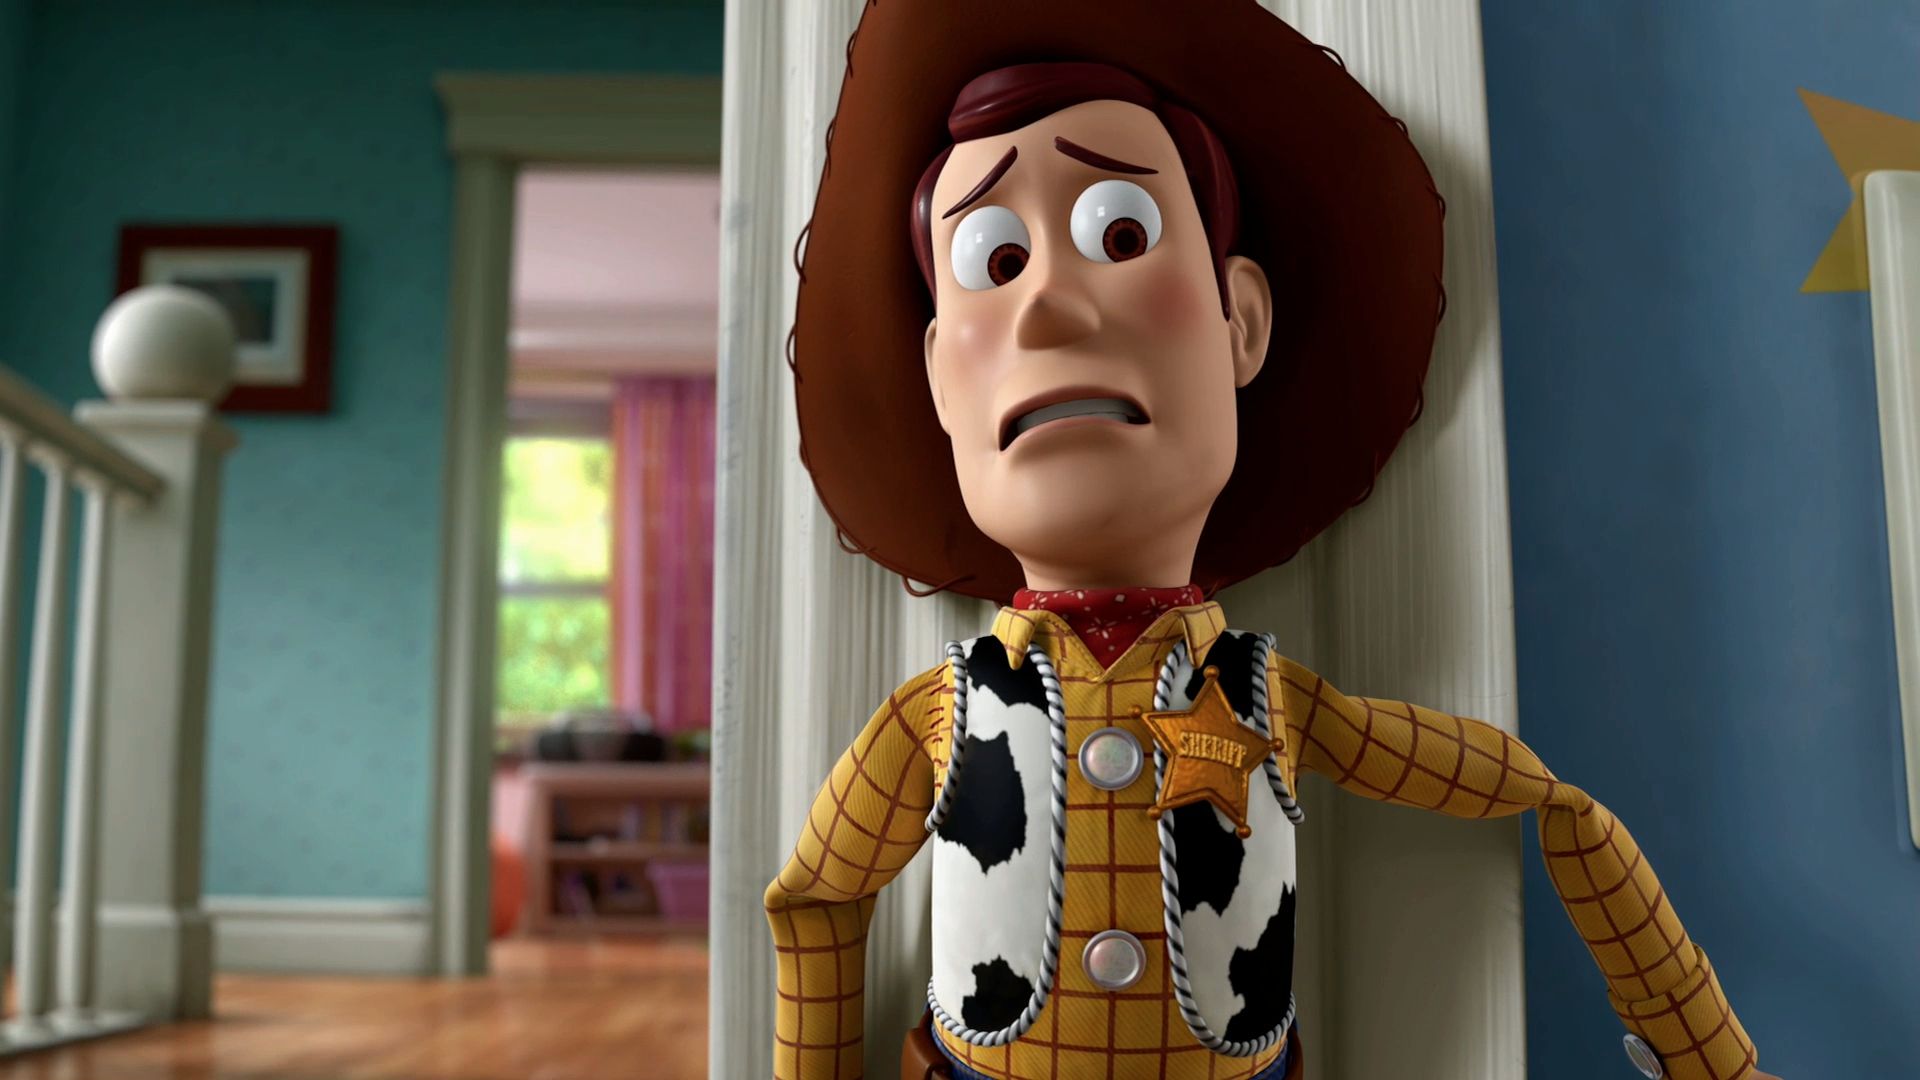 Toy Story Computer Wallpapers, Desktop Backgrounds | 1920x1080 ...